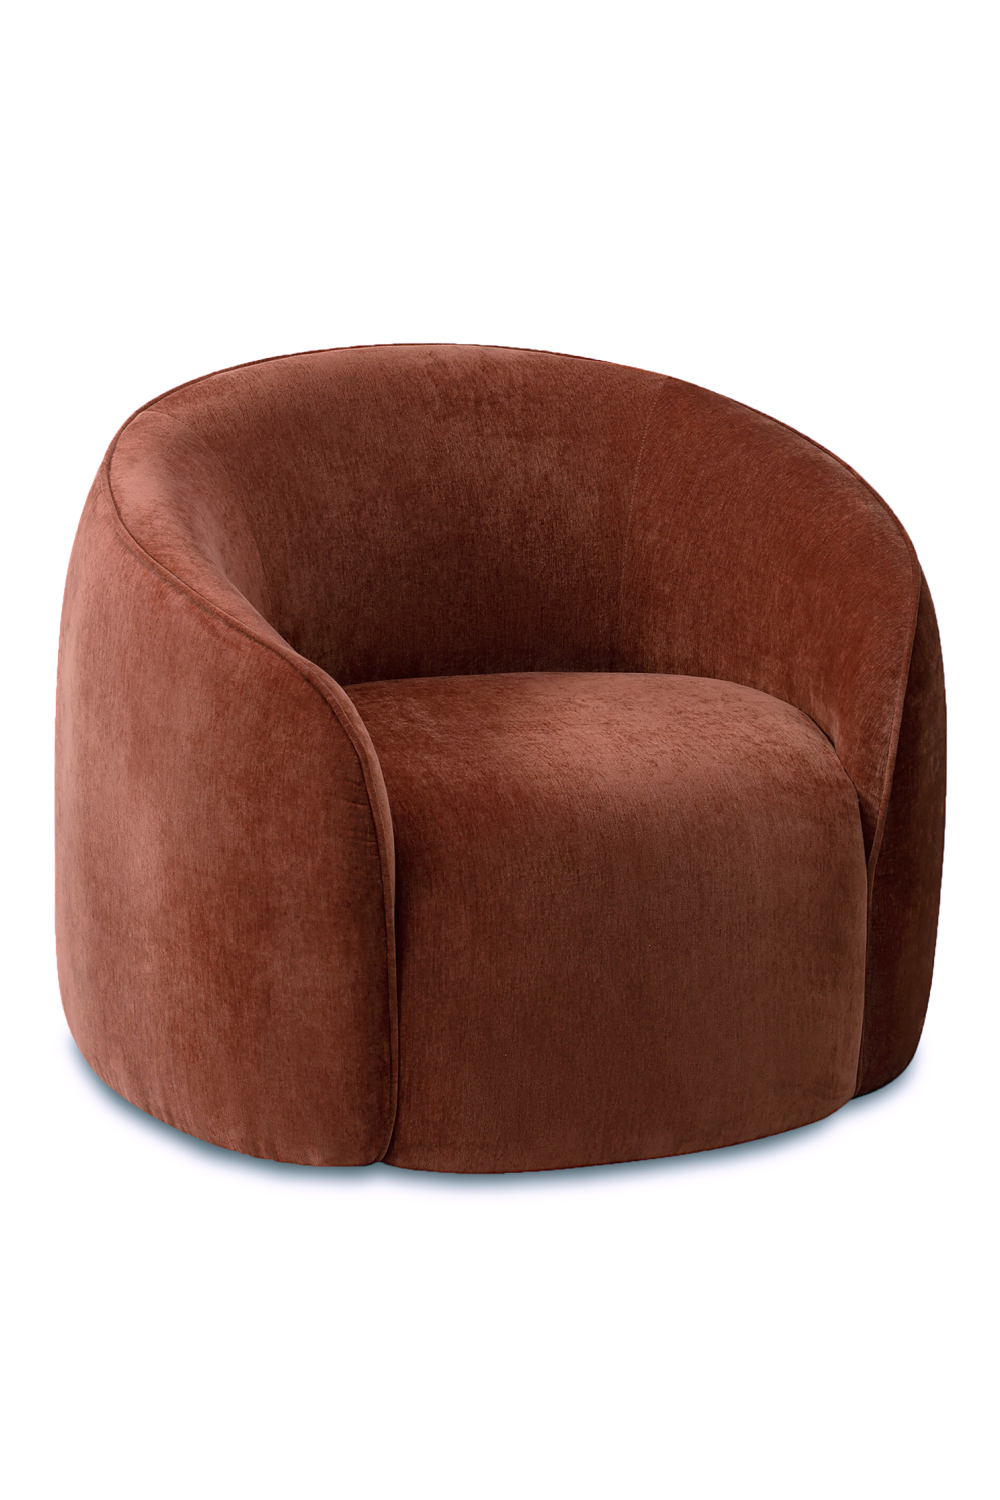 Rust Rounded Occasional Chair | Liang & Eimil Polta | Oroa.com